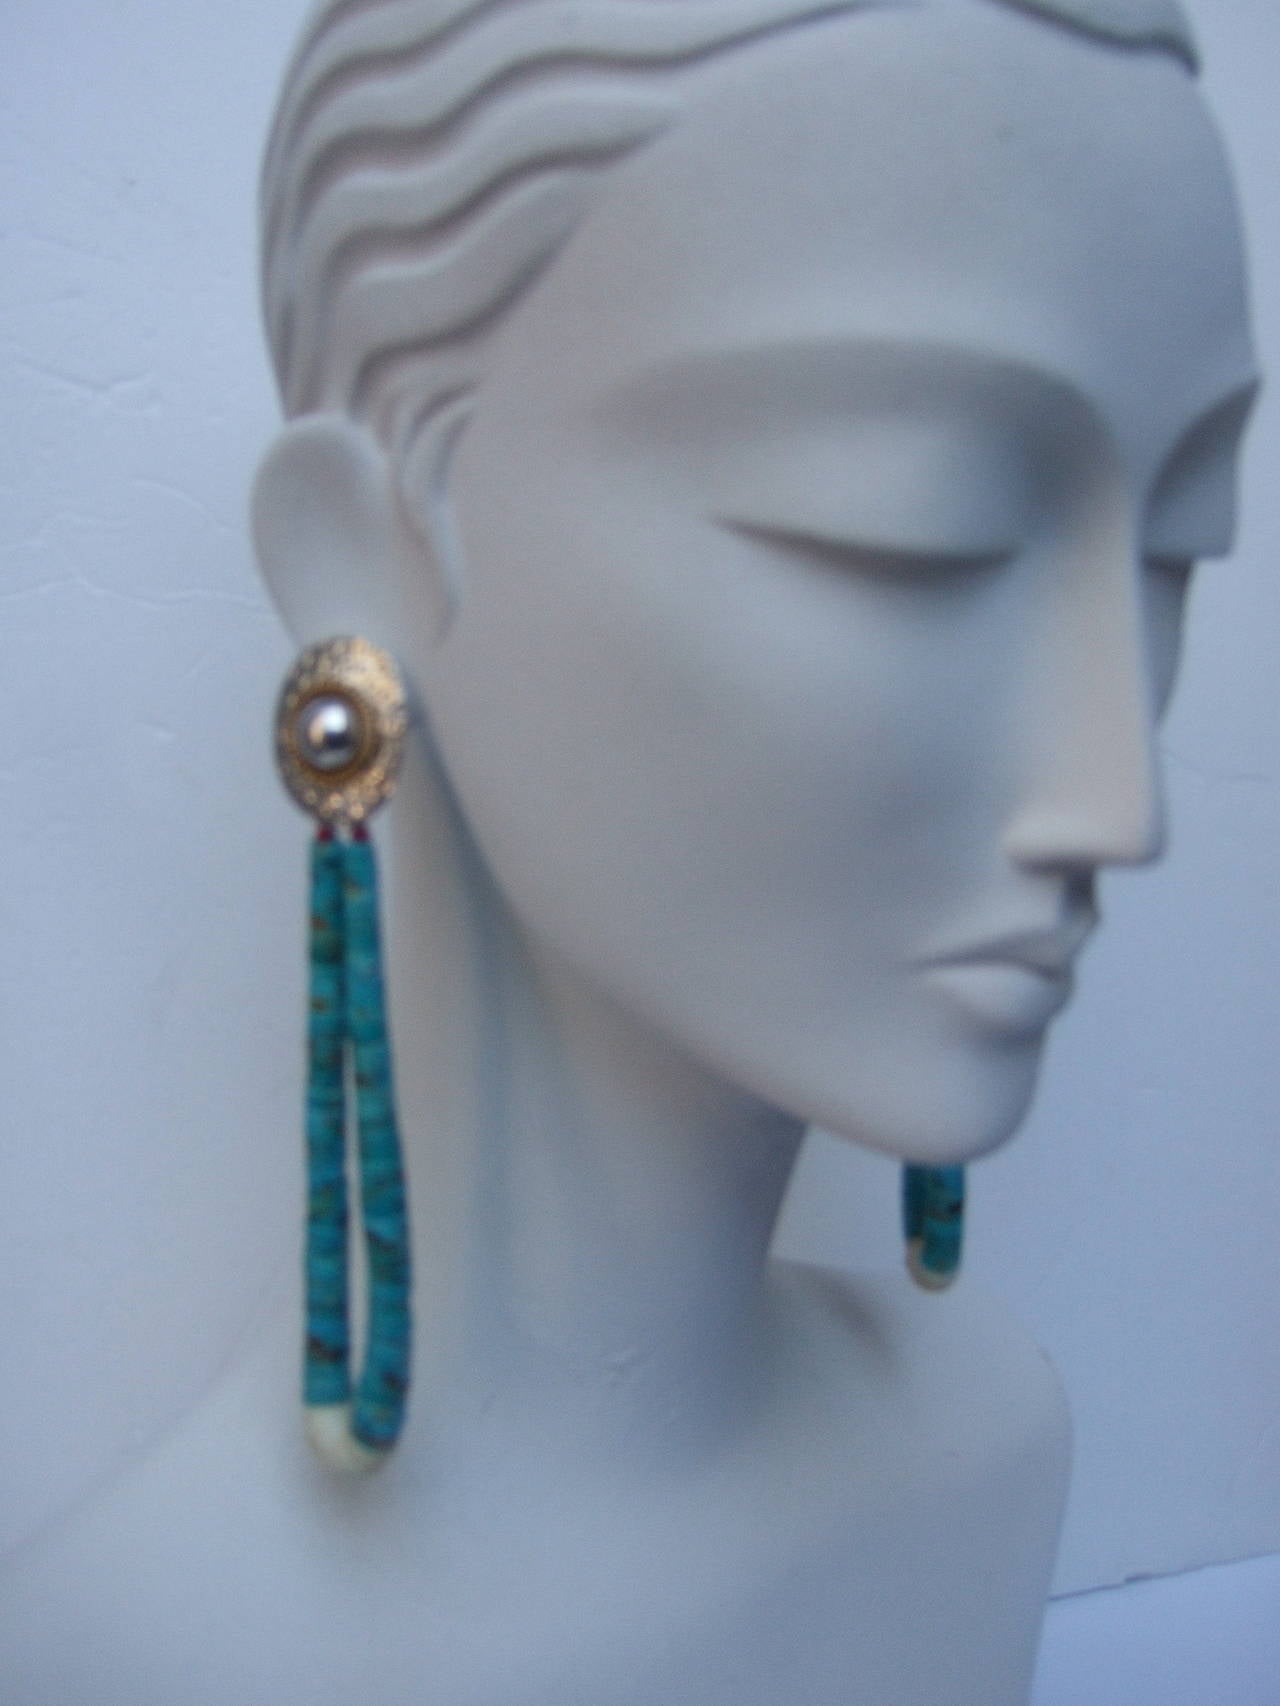 Artisan turquoise & sterling heisha pierced dangle earrings c 1970s
The massive handmade earrings are designed with hand rolled graduated turquoise sliced stones. The tribal style pierced earrings hang from a hammered sterling oval disc that has a